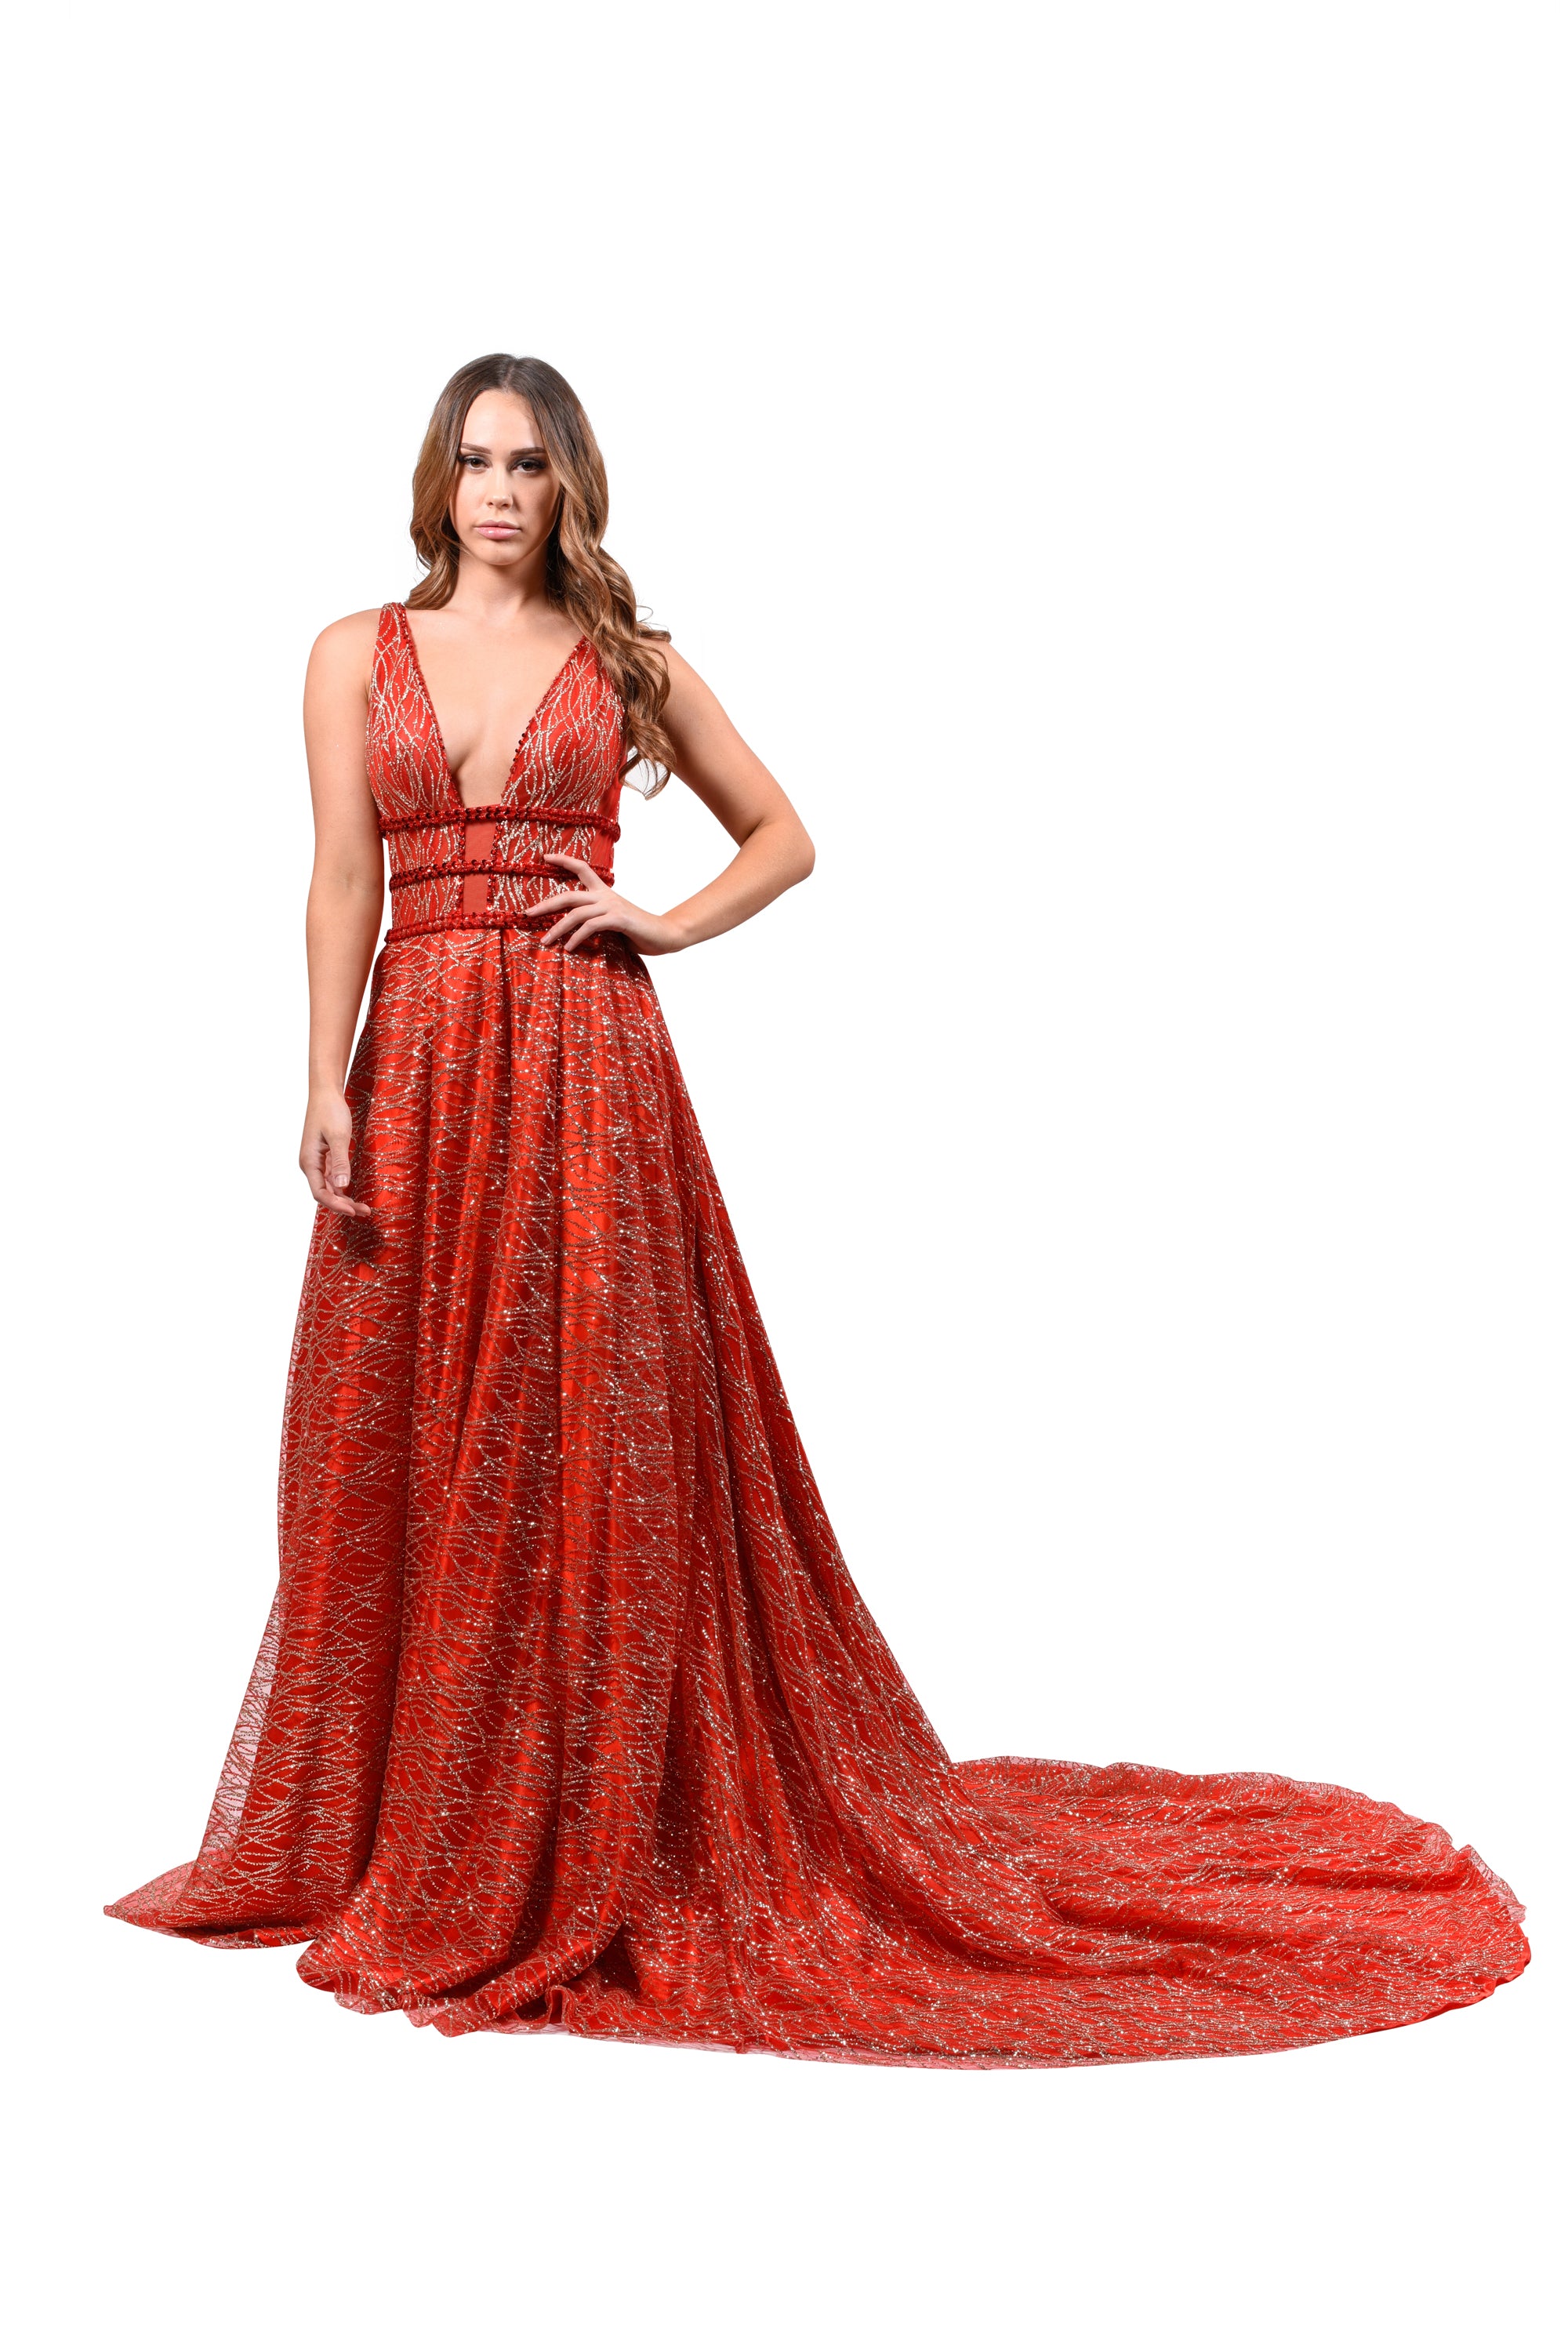 Honey Couture GLORIA Red Gold Glitter Infused Formal Ball Gown Private Label$ AfterPay Humm ZipPay LayBuy Sezzle